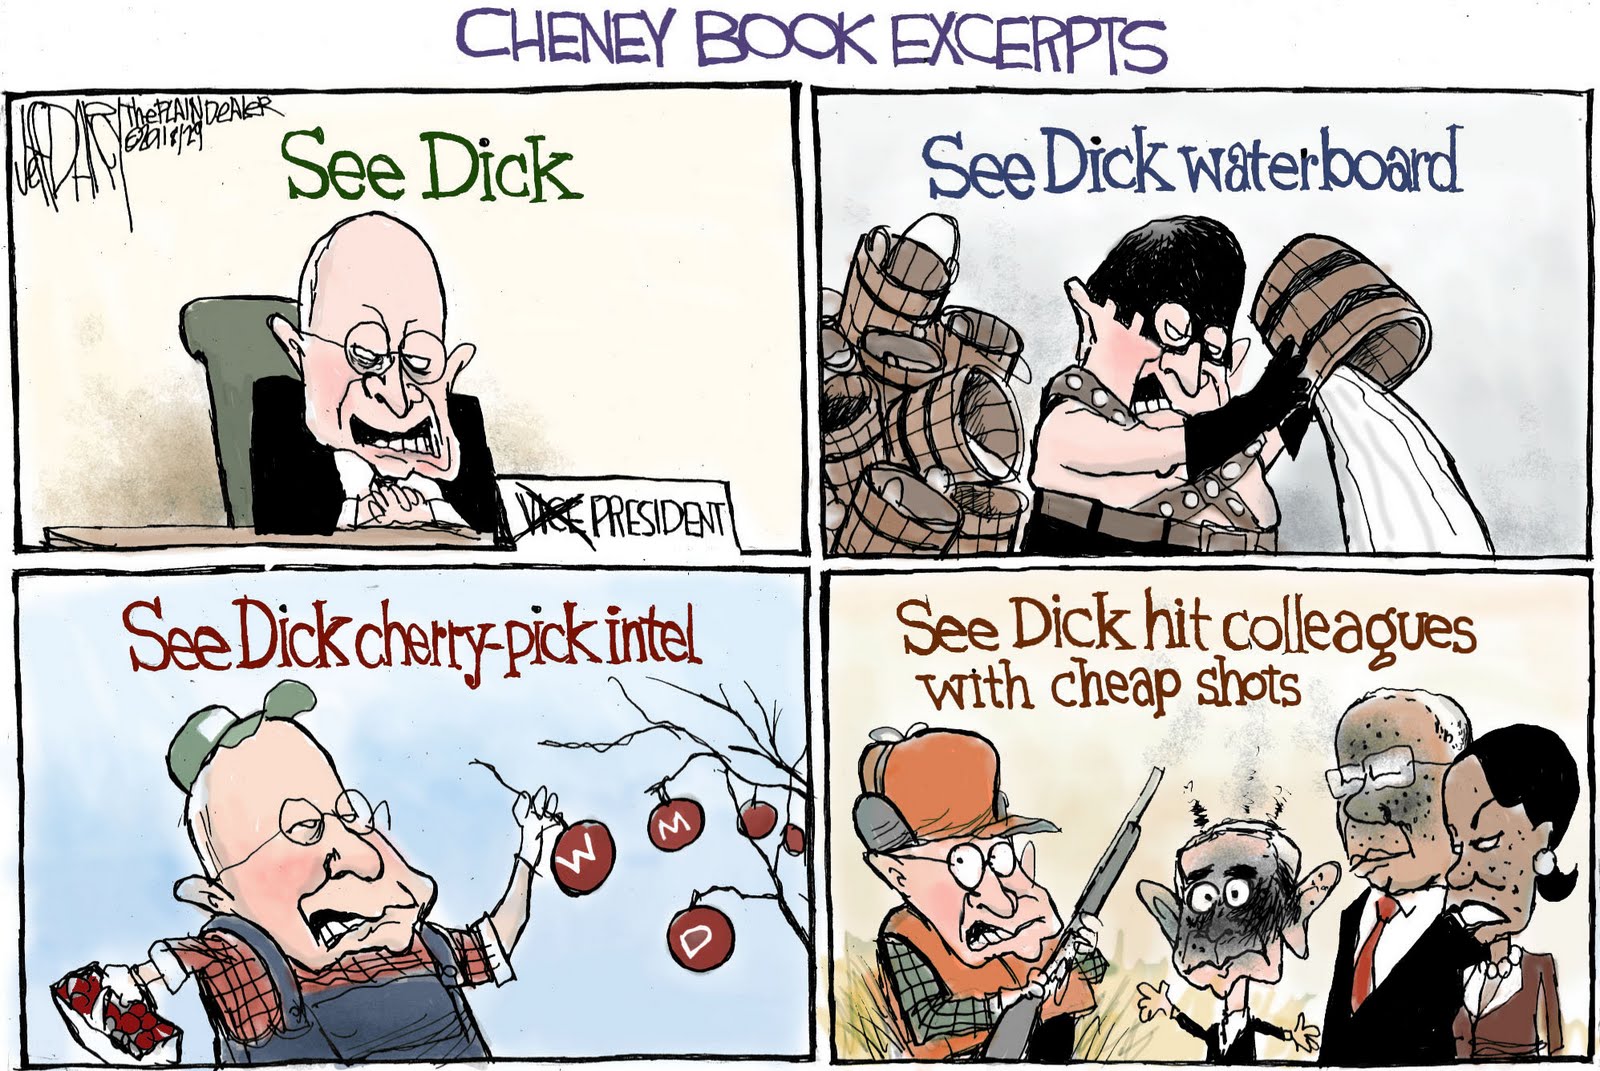 Dick cheney almost dies